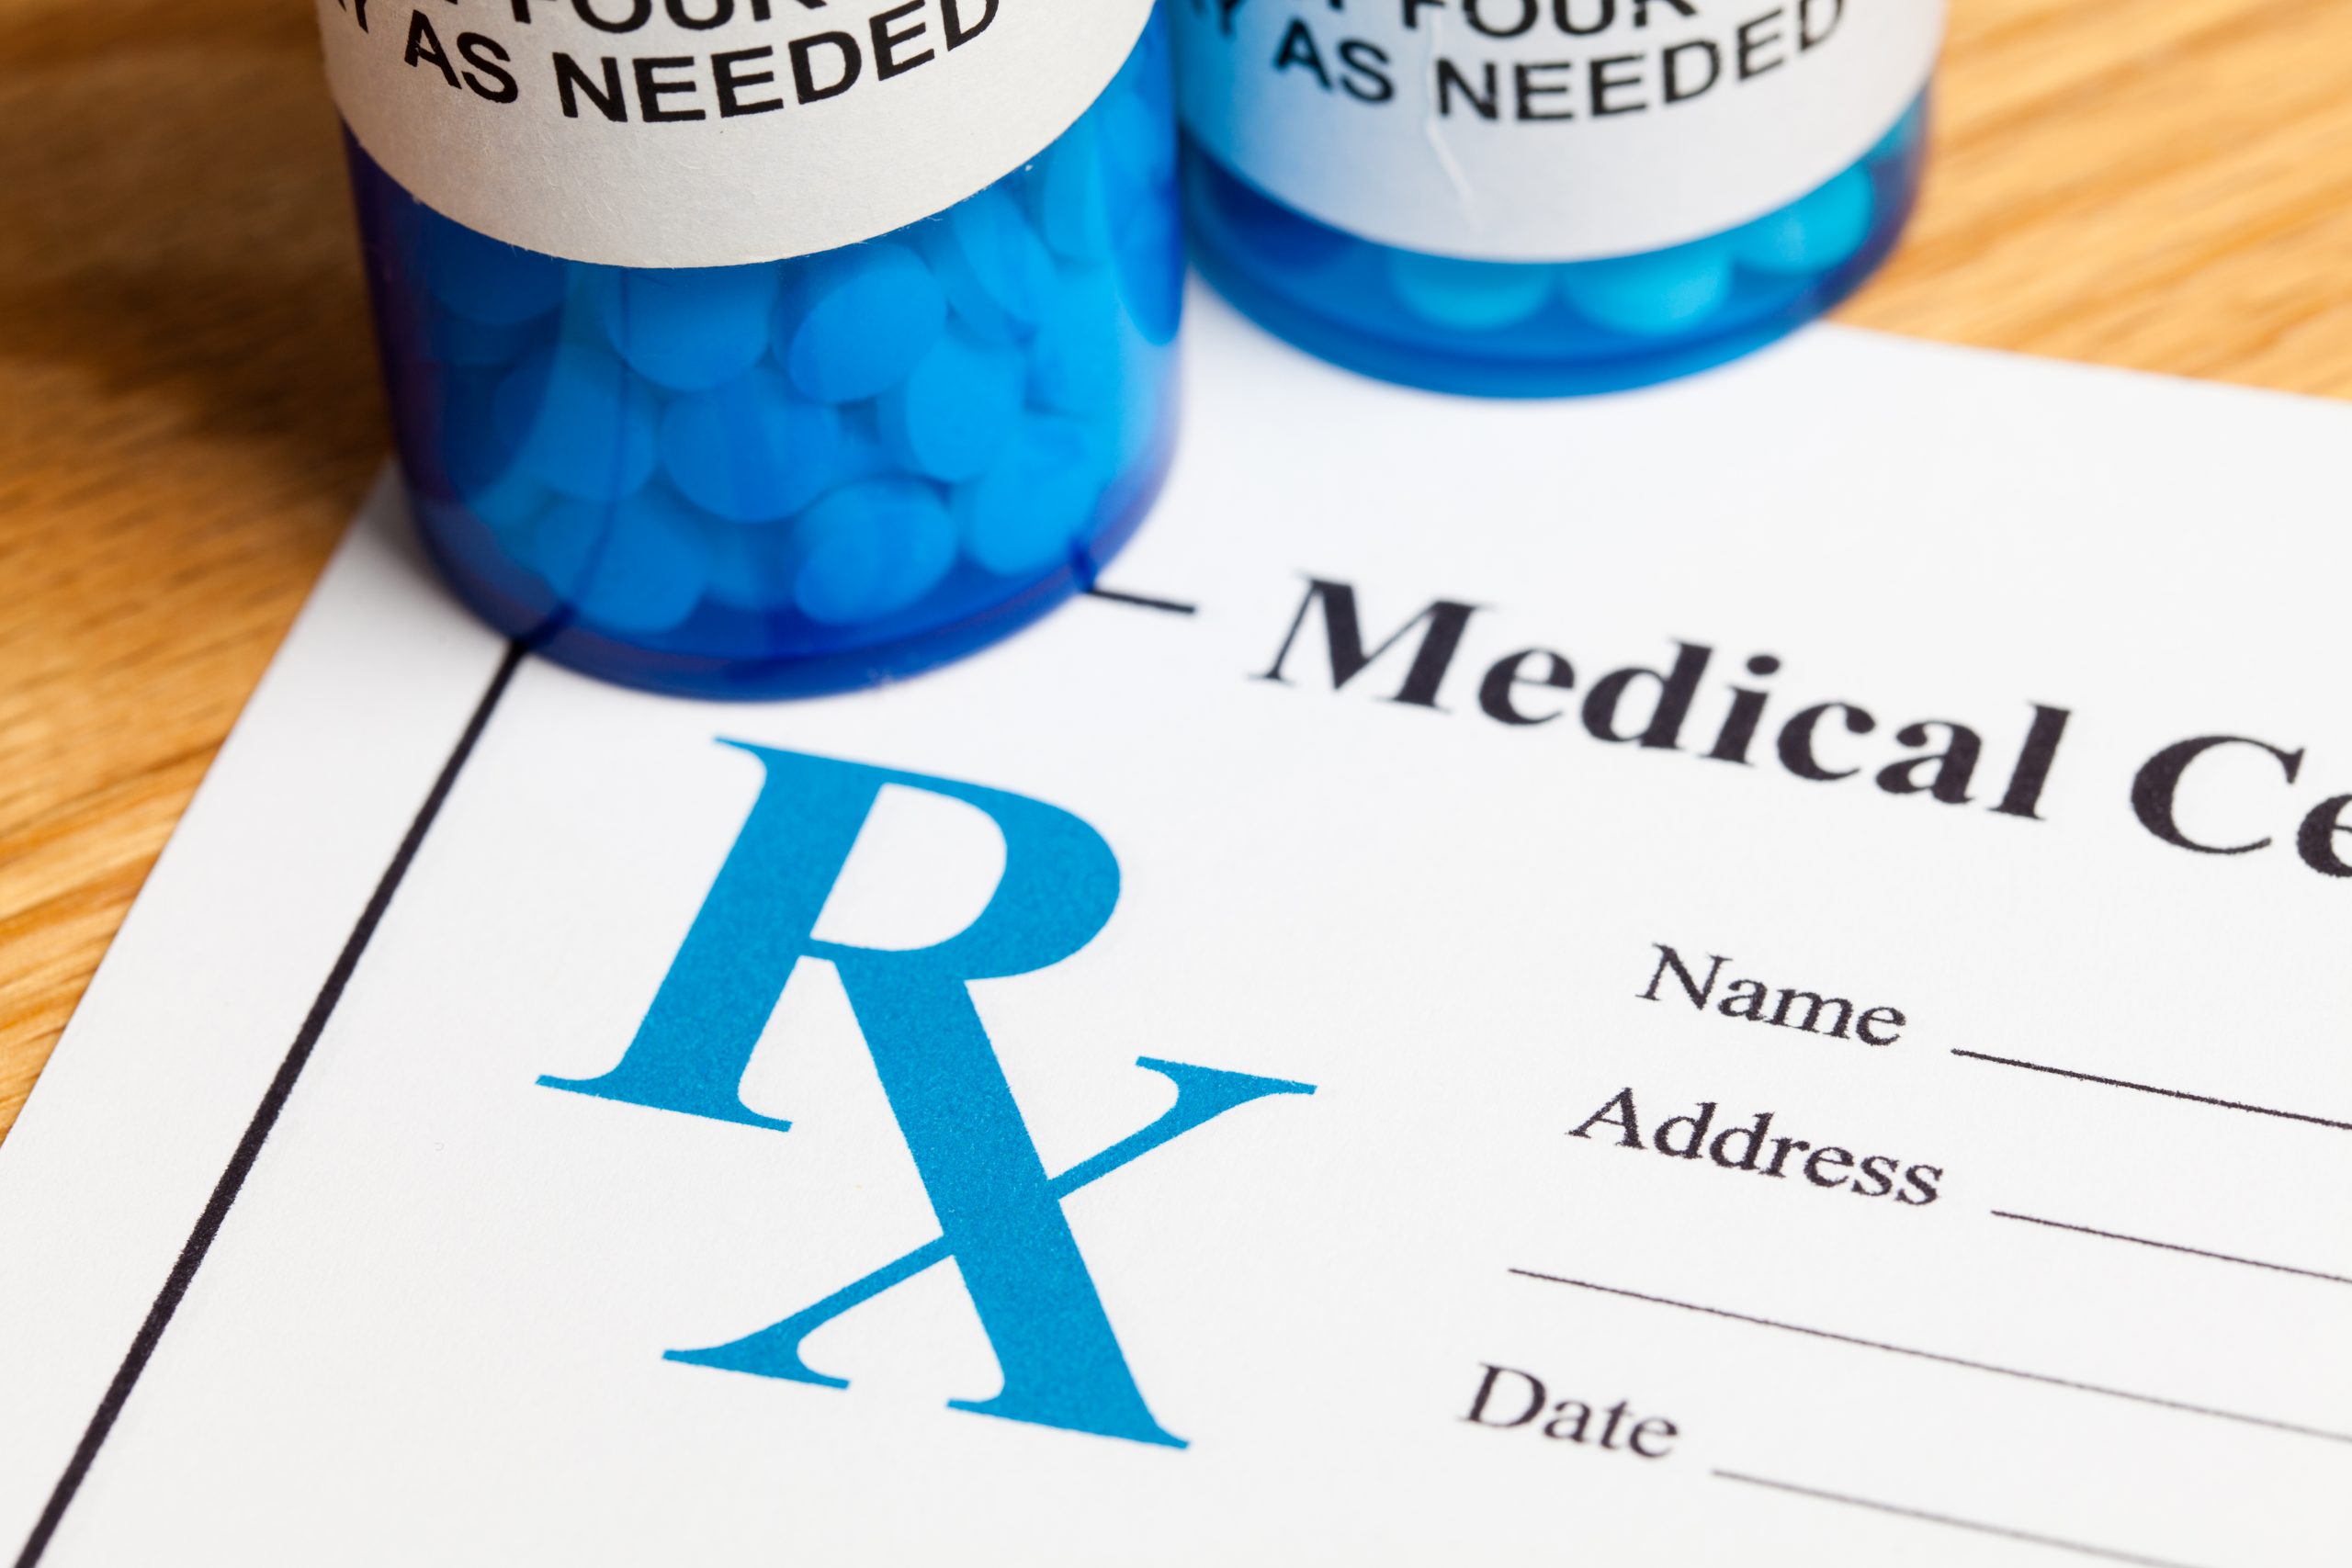 Extra Help For Medicare Part D